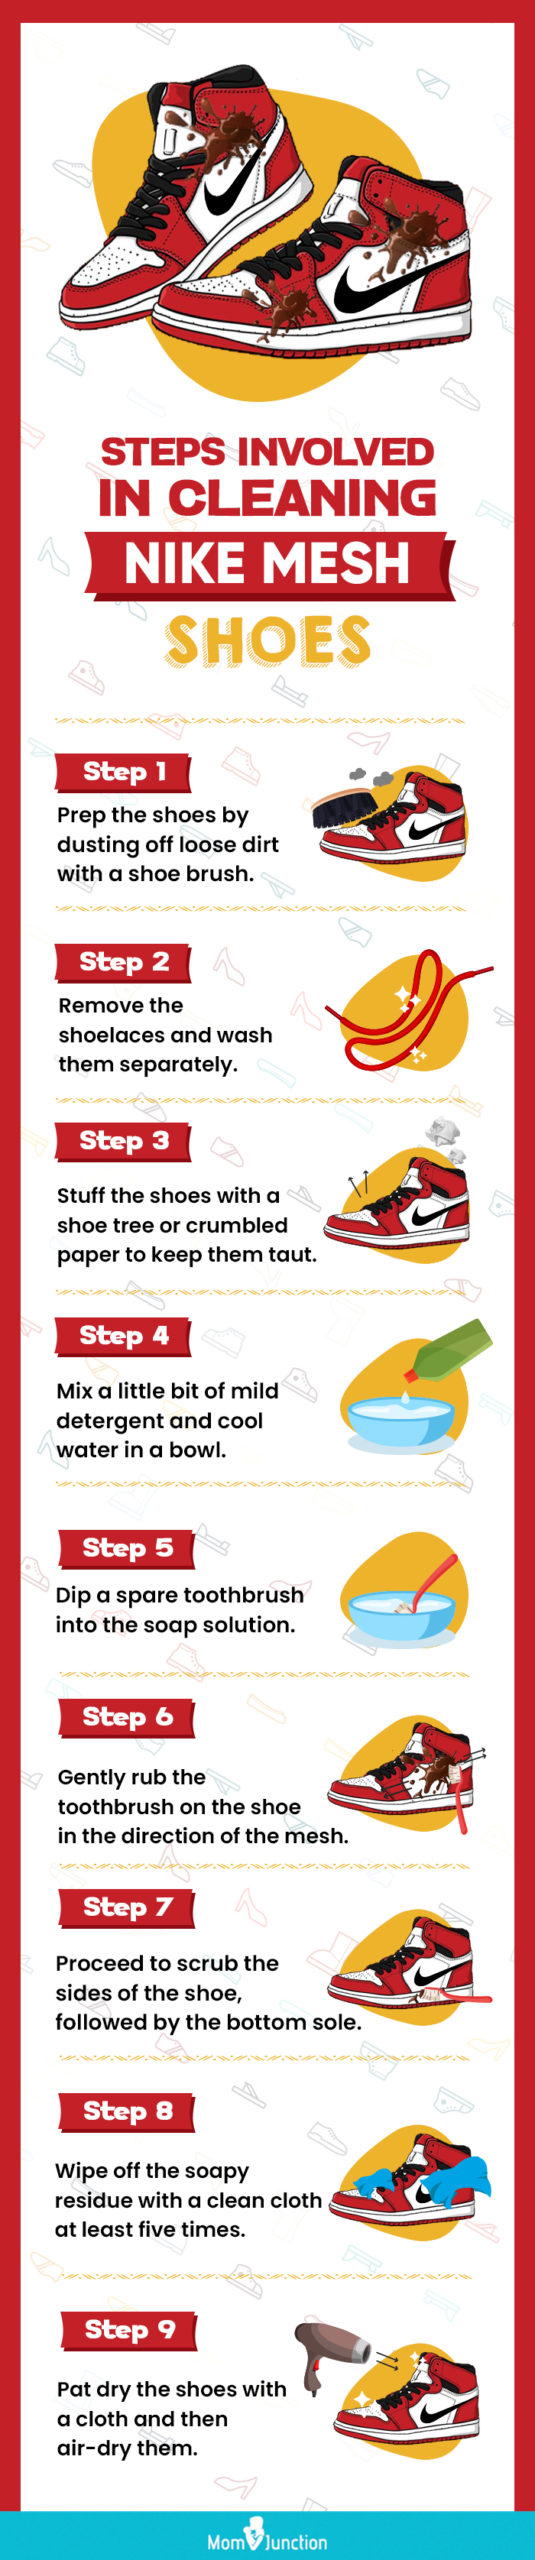 Steps Involved In Cleaning Nike Mesh Shoes (infographic)